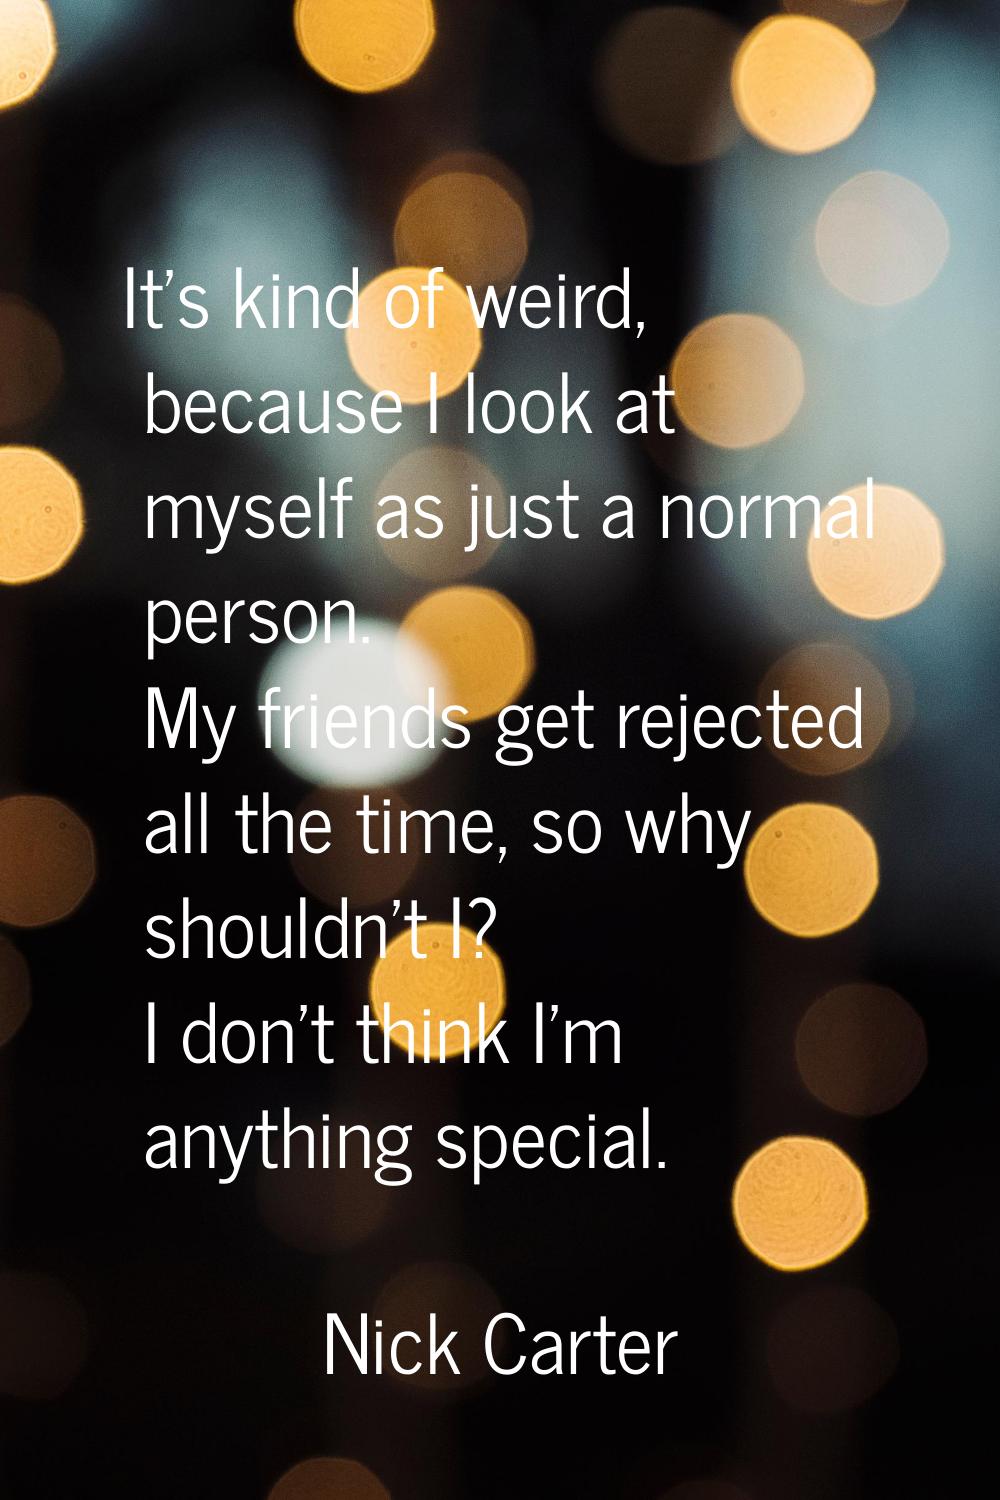 It's kind of weird, because I look at myself as just a normal person. My friends get rejected all t